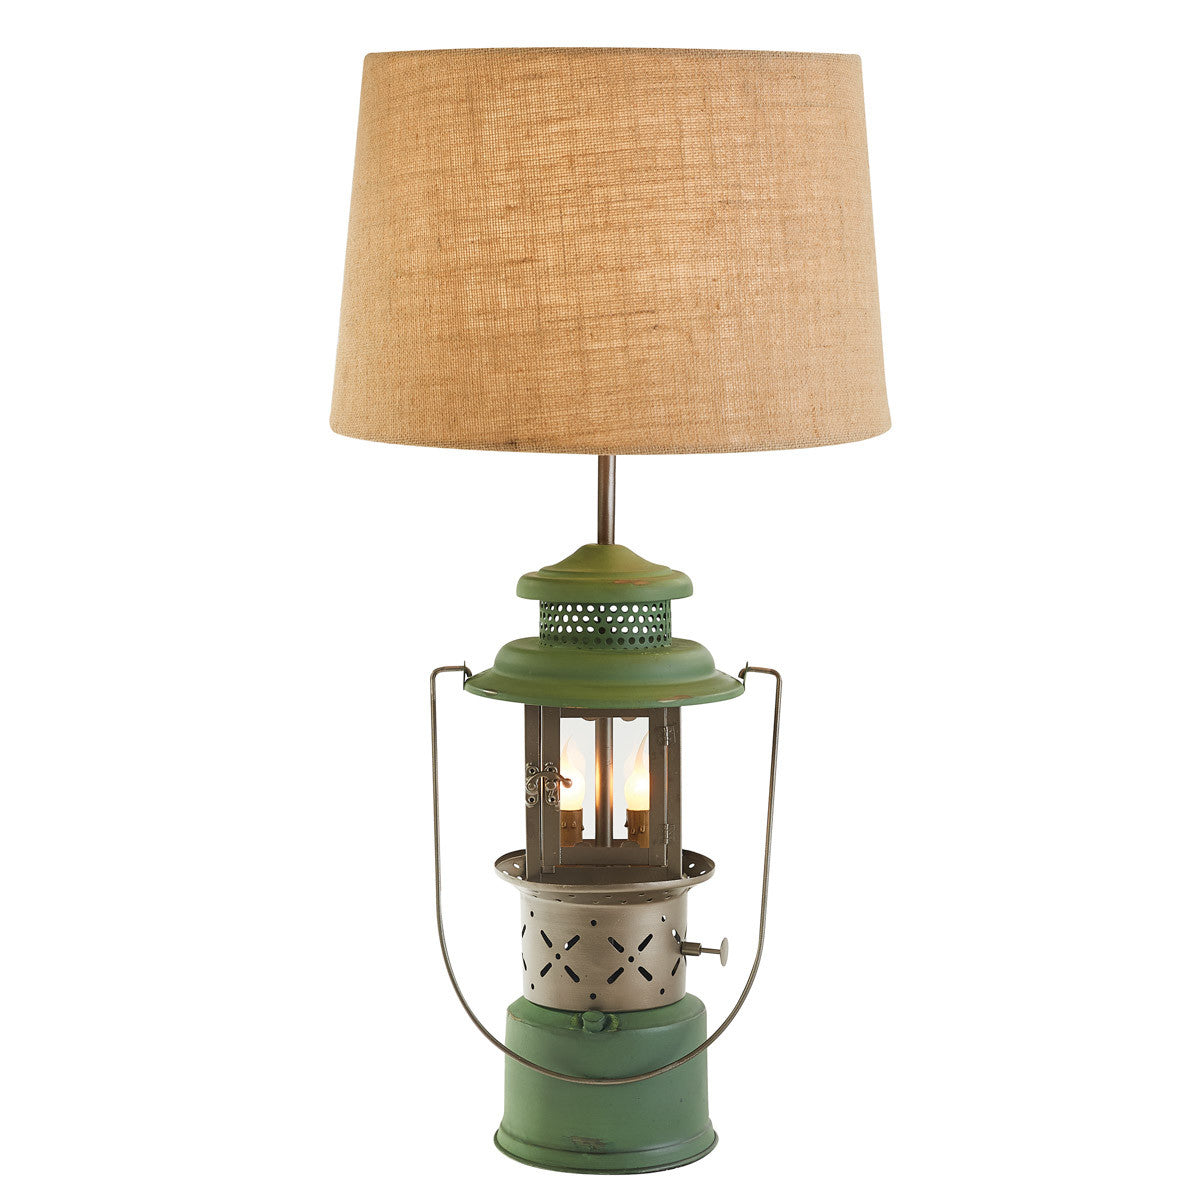 Green Camp Lantern Lamp With Shade - Park Designs